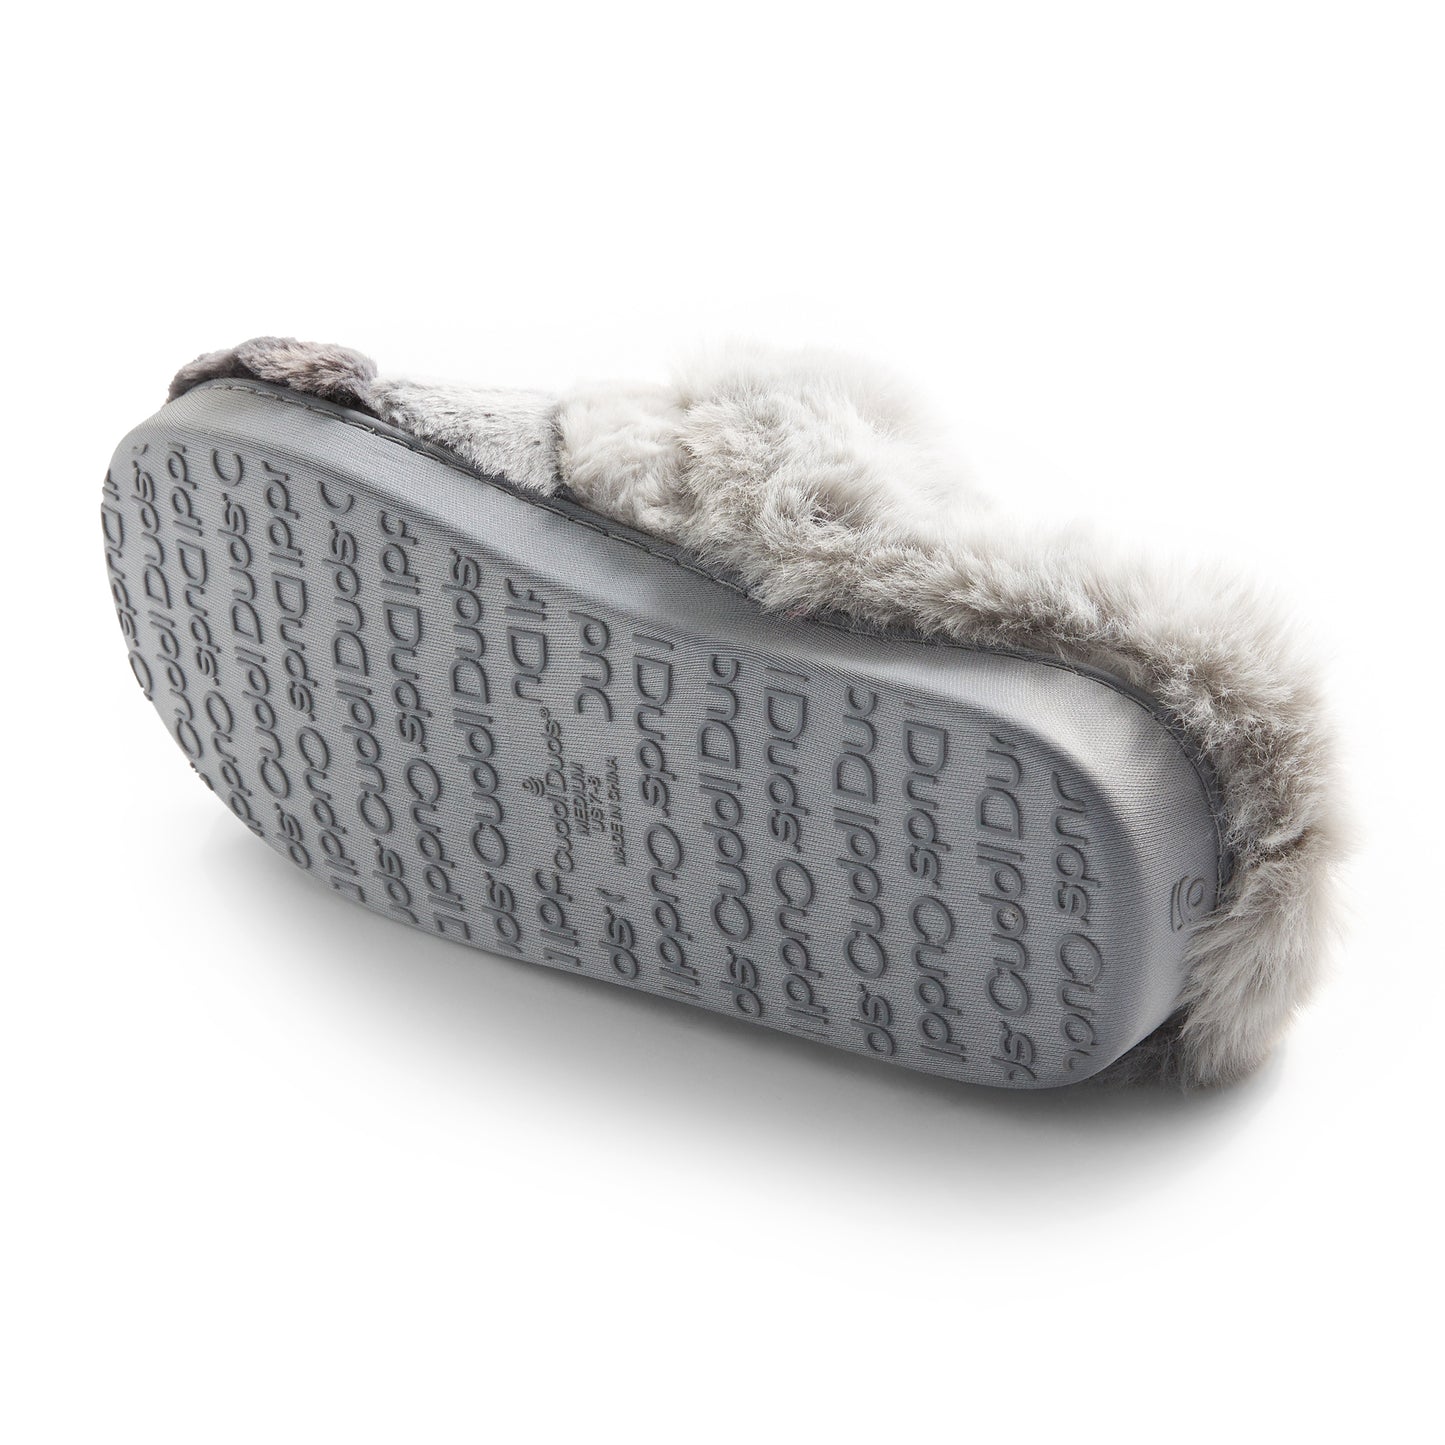 Ultimate Gray Multi;@A Faux Fur clog slipper with grey-white layers